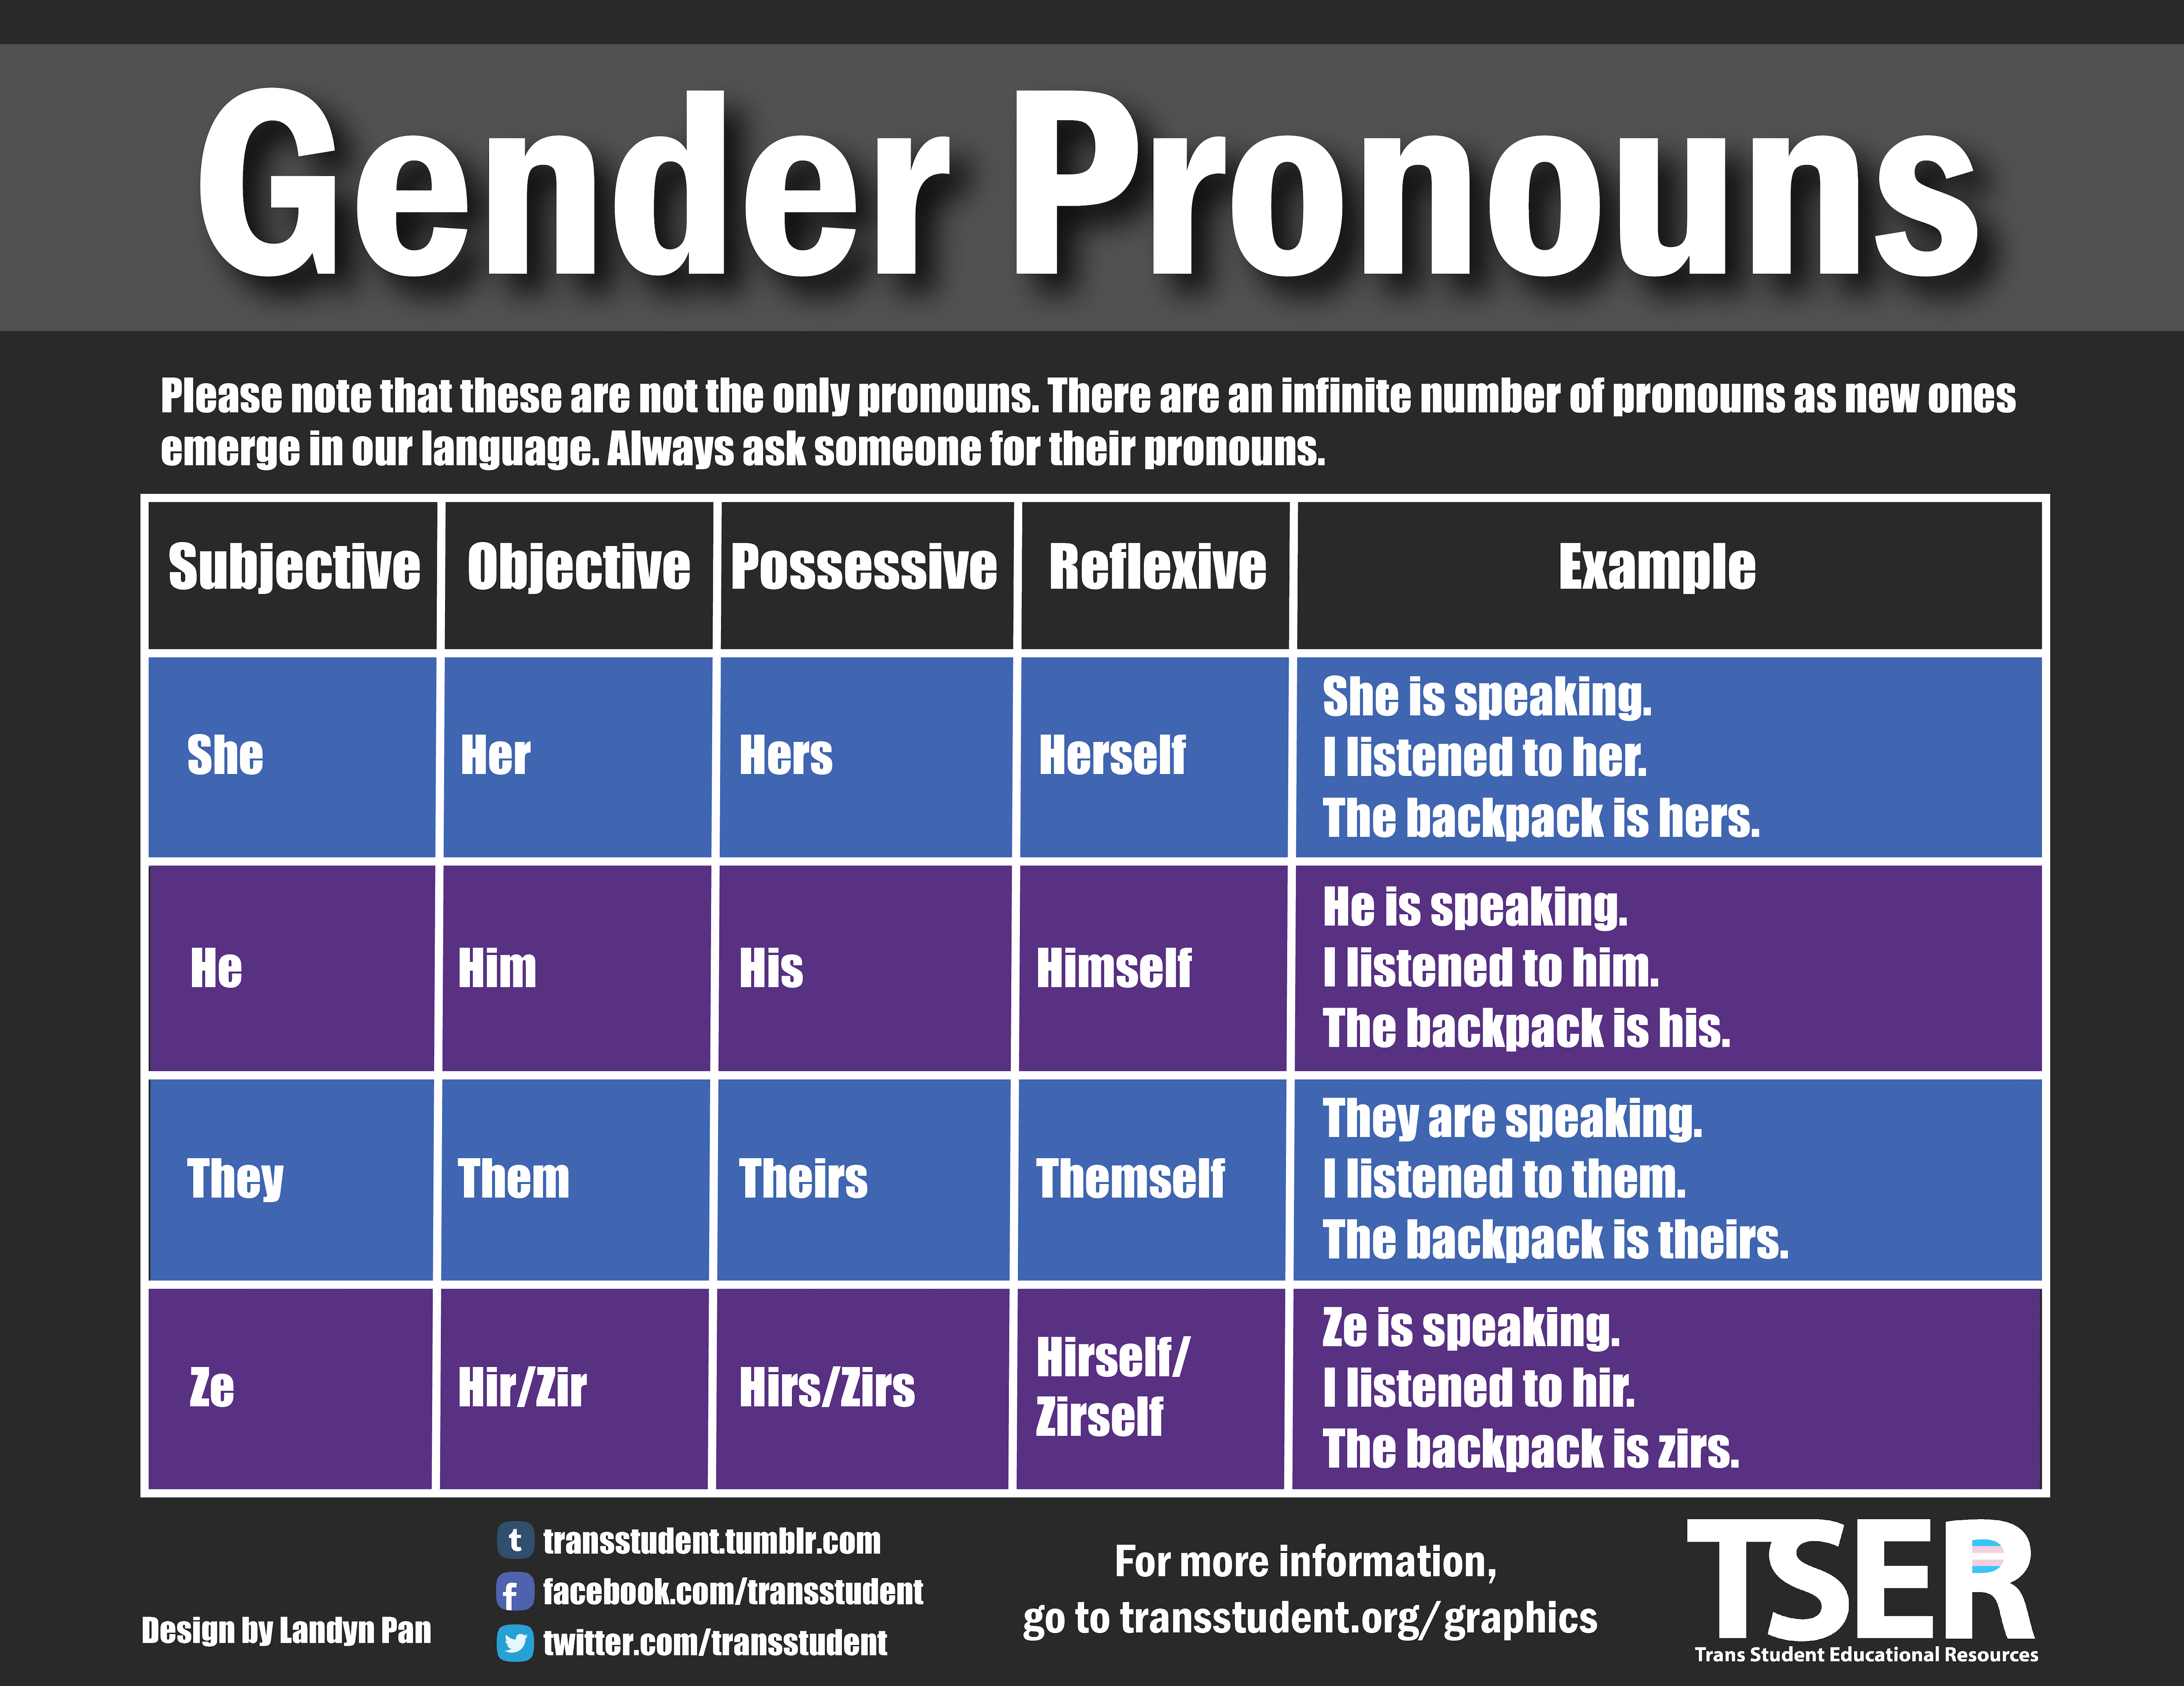 options for non gender binary pronouns to address students